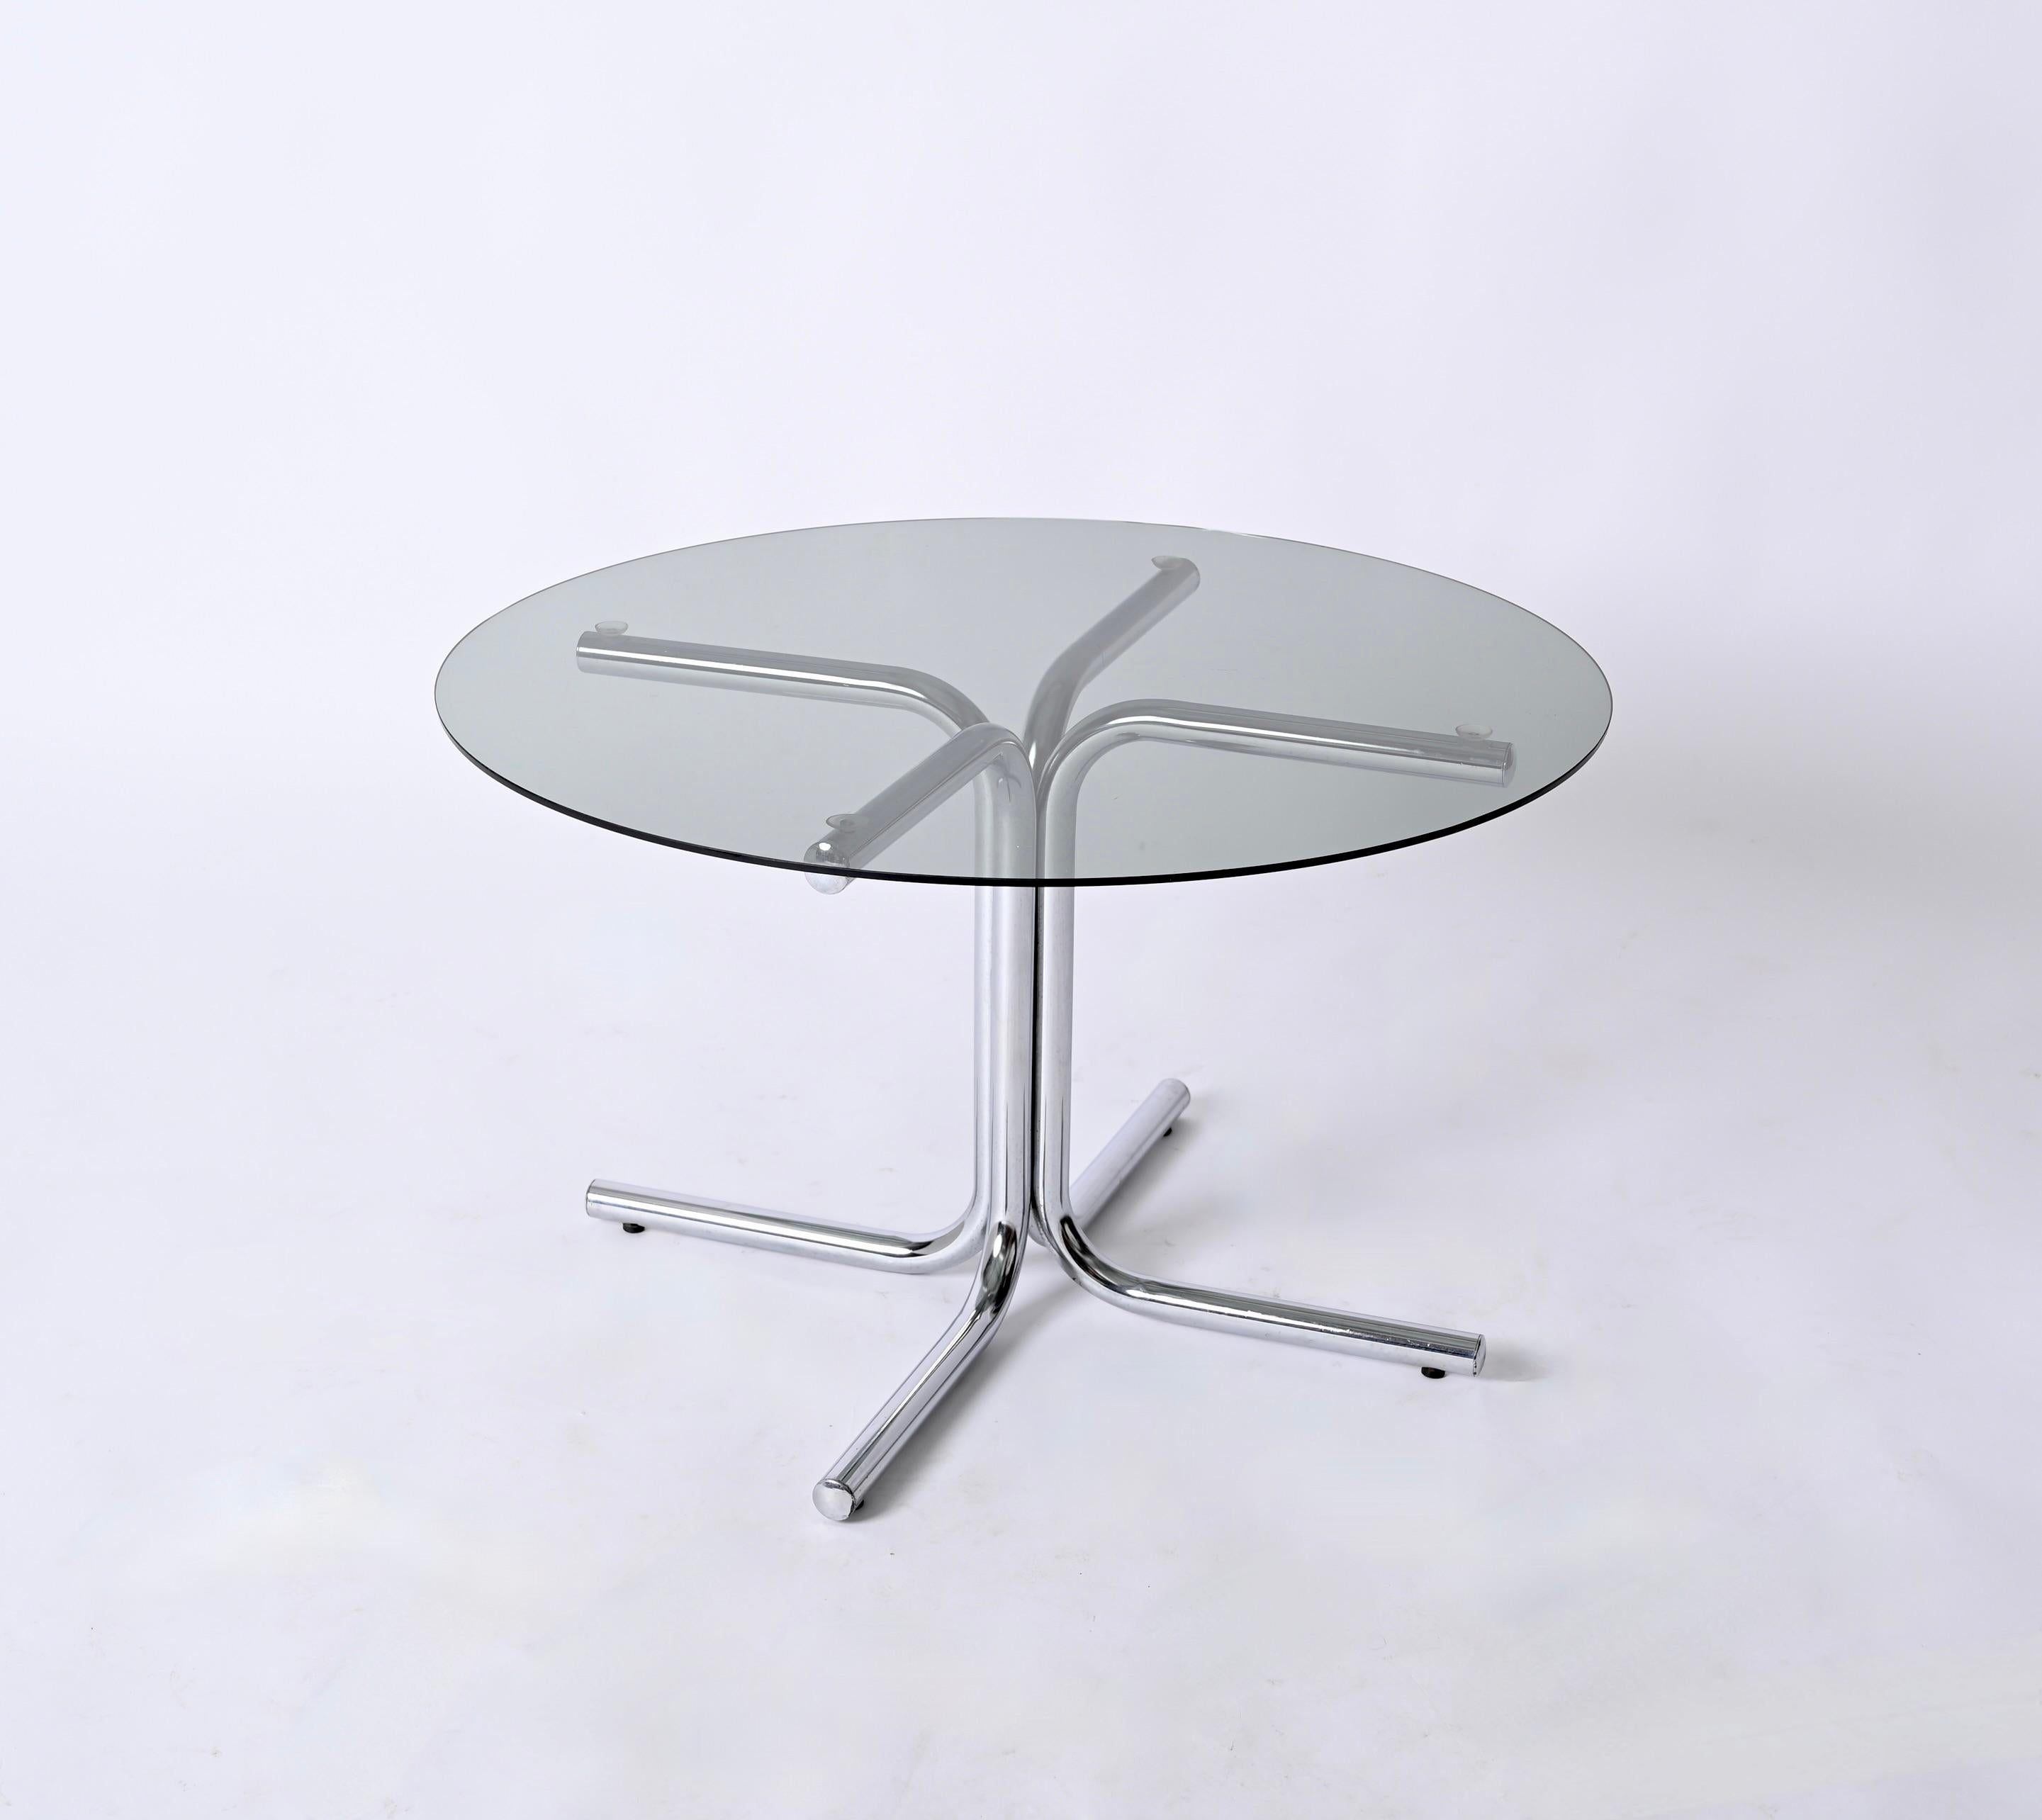 Chrome and Smoked Glass Round Italian Coffee Table, Giotto Stoppino Style, 1970s For Sale 2